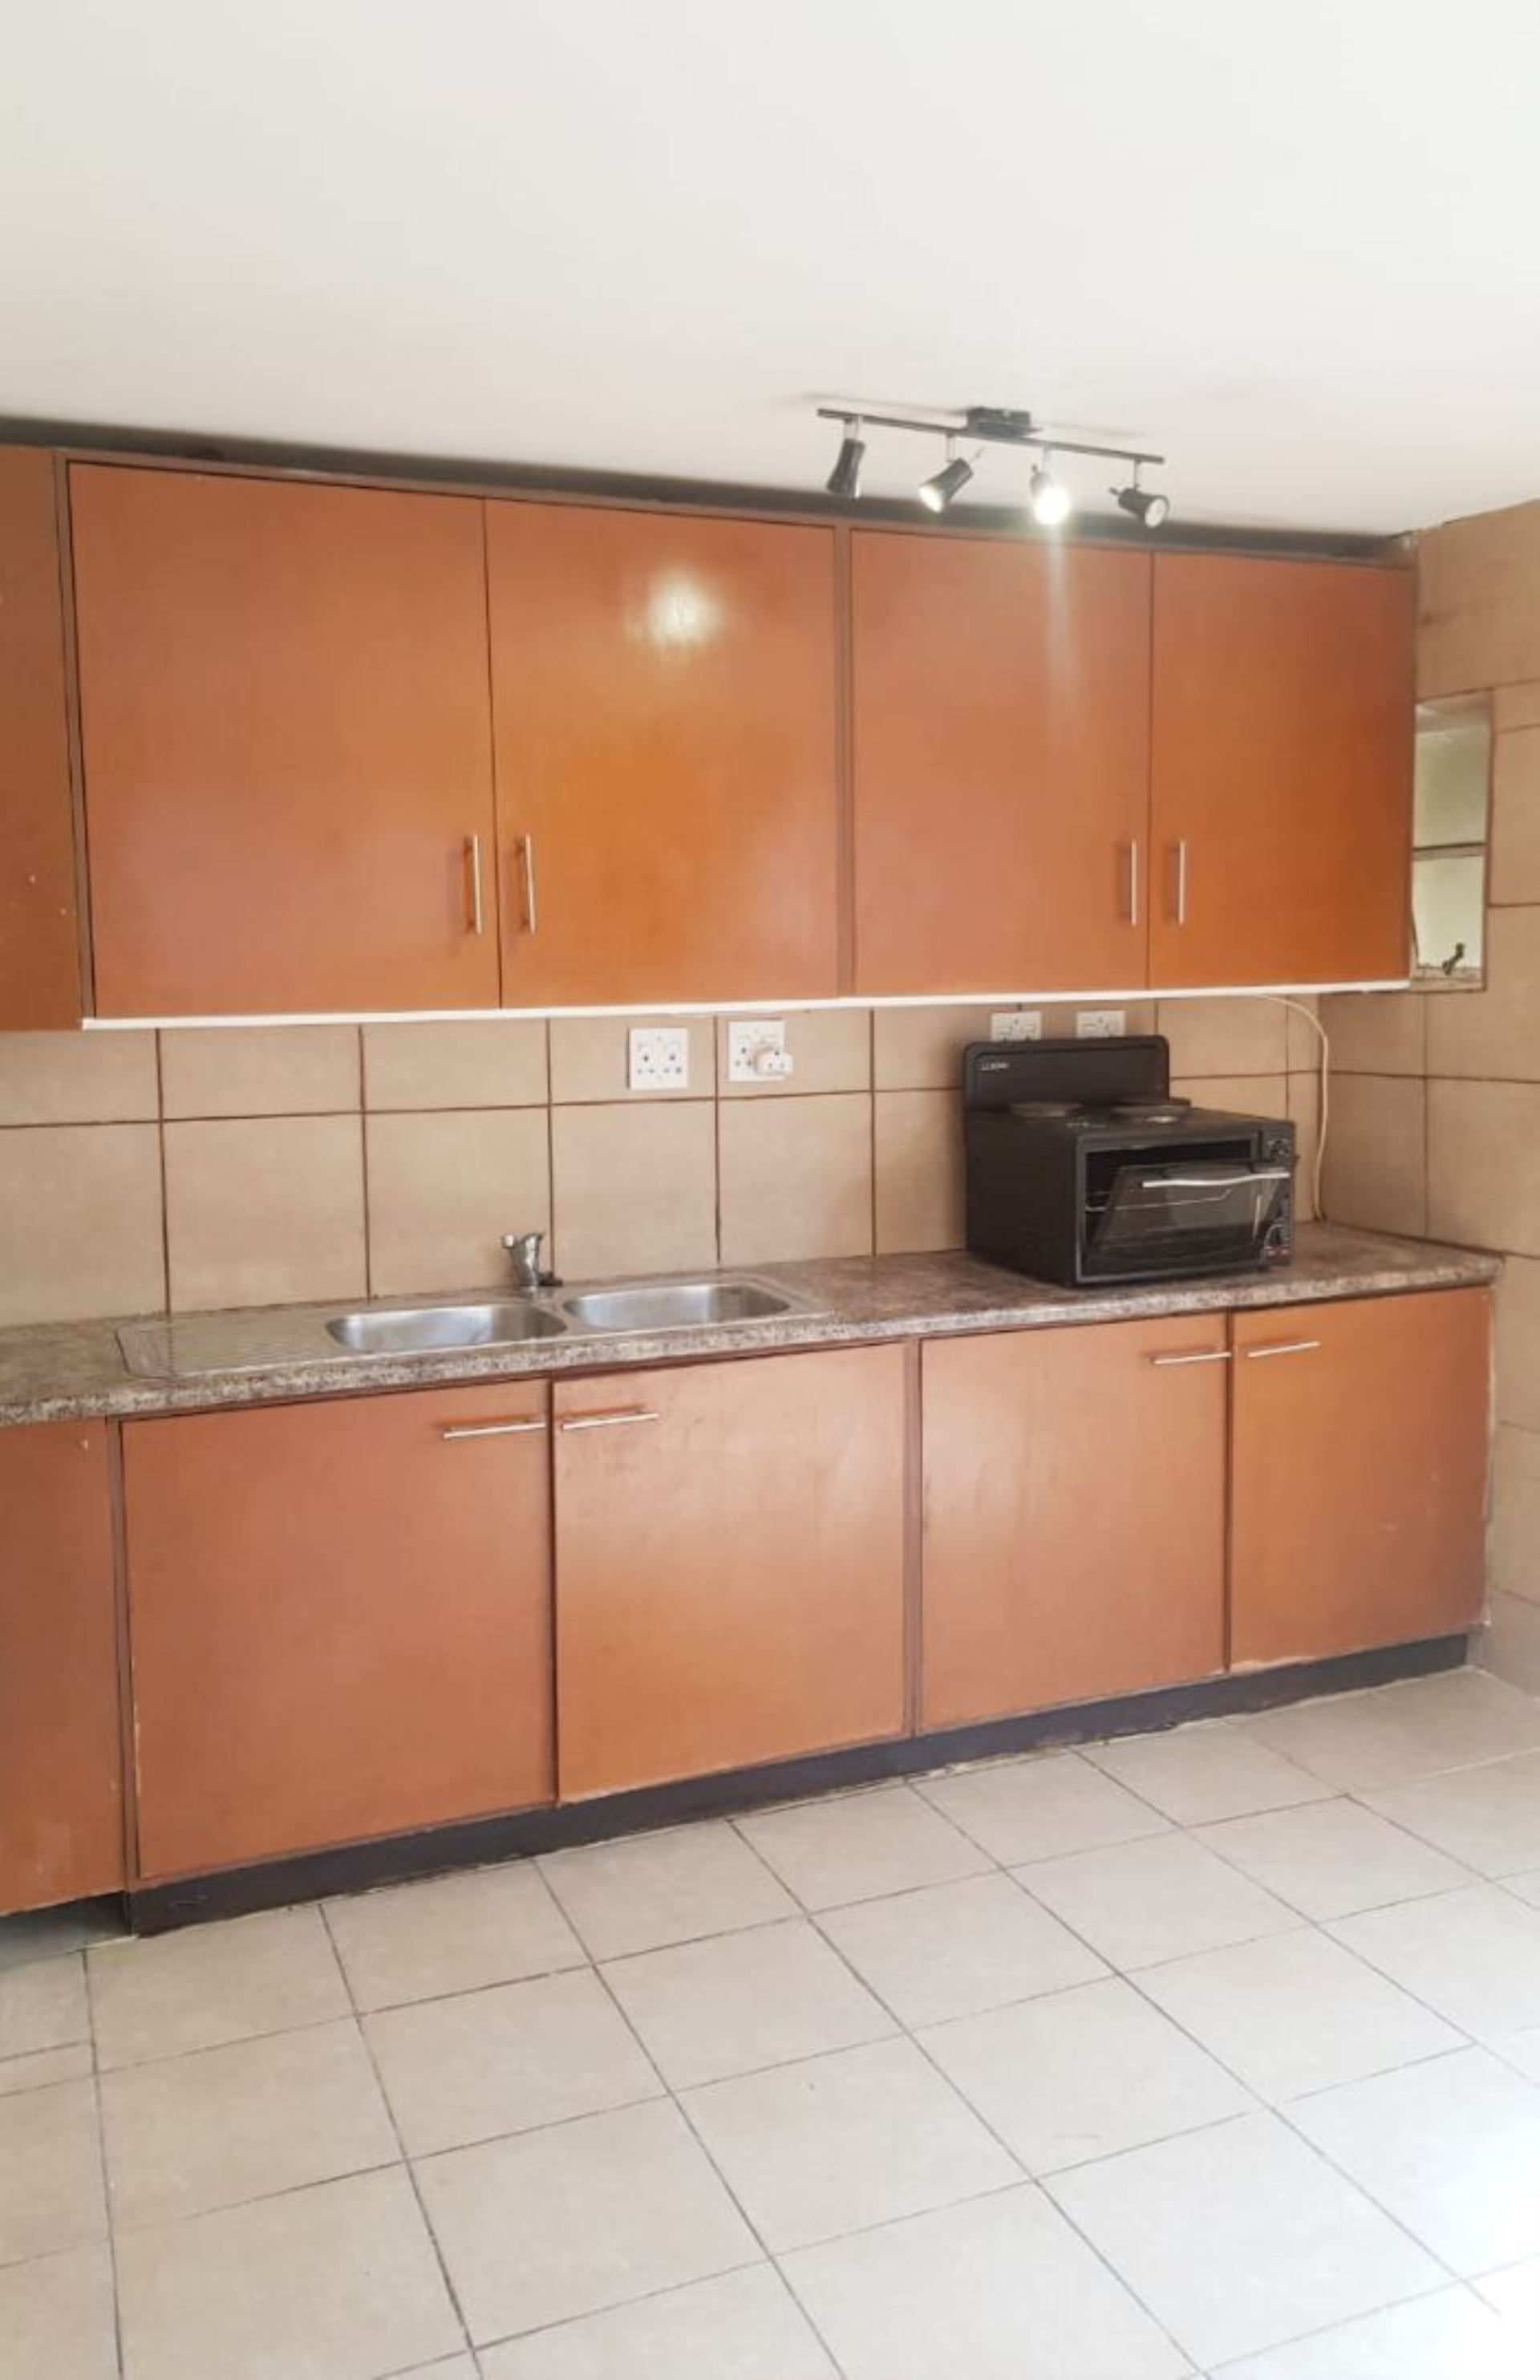 1 Bedroom Flat To Rent in Sydenham for R6,500 per month ...